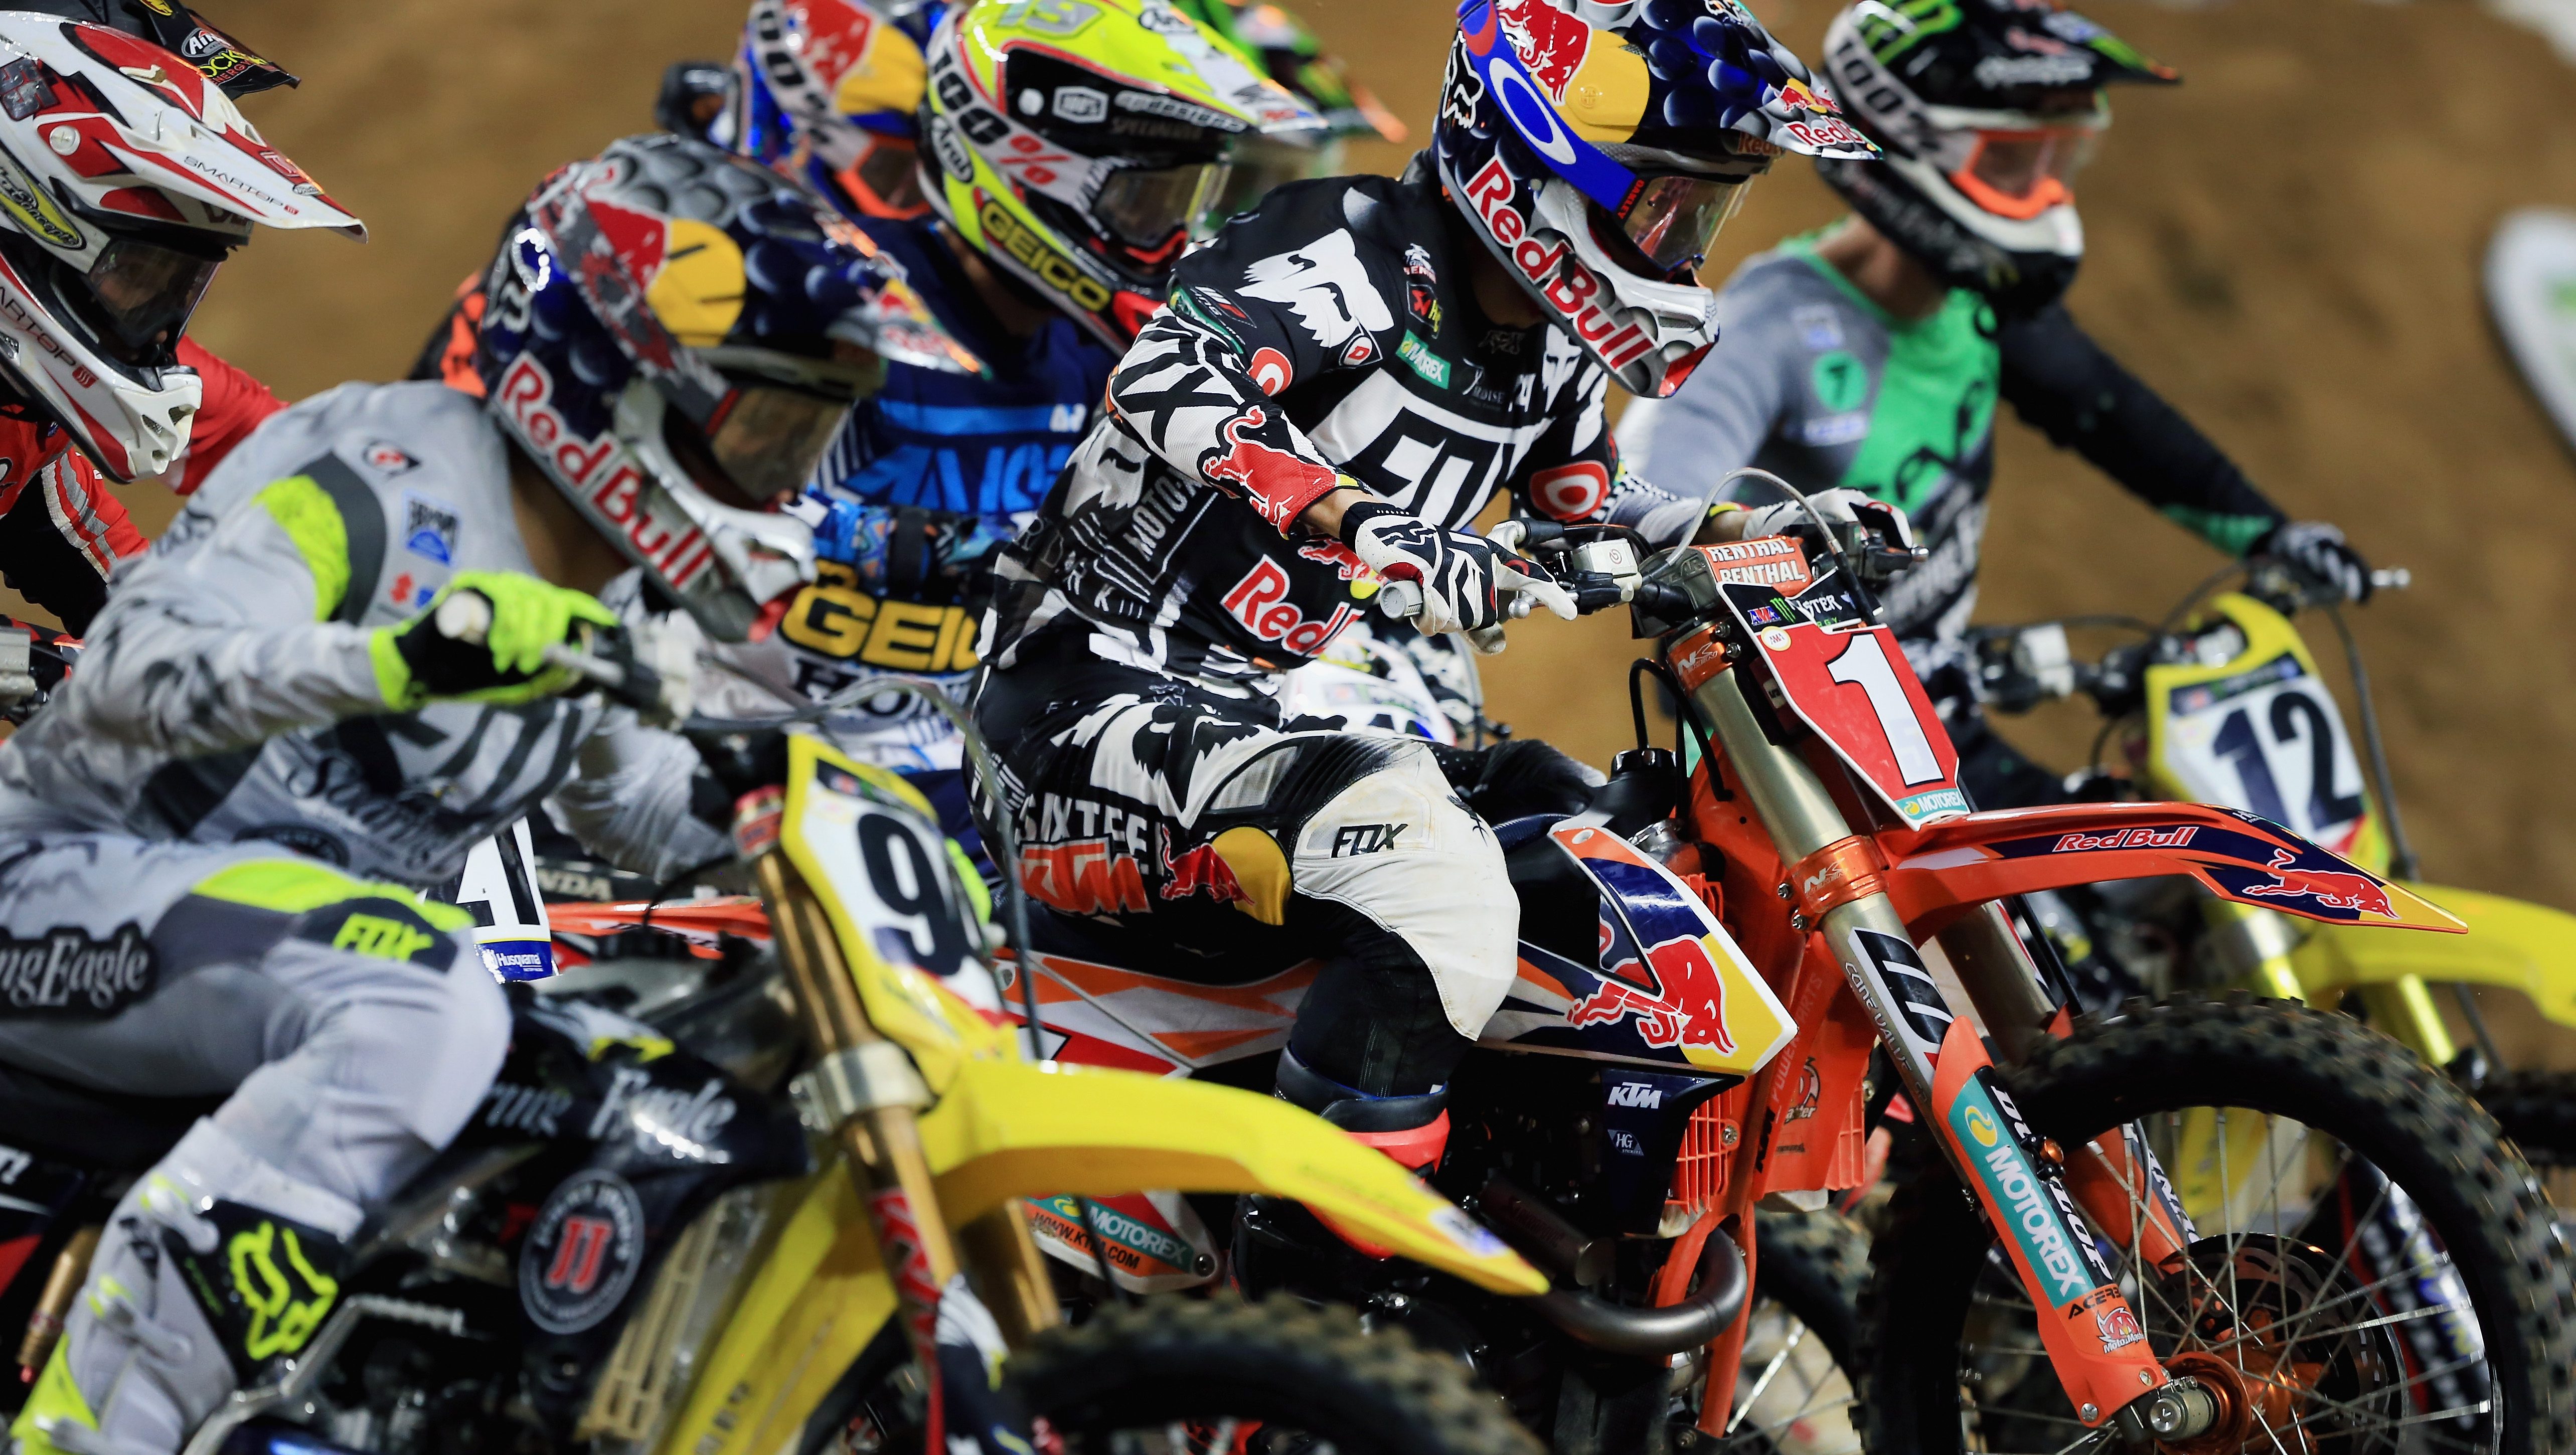 How to Watch Supercross Round 11 Online Without Cable